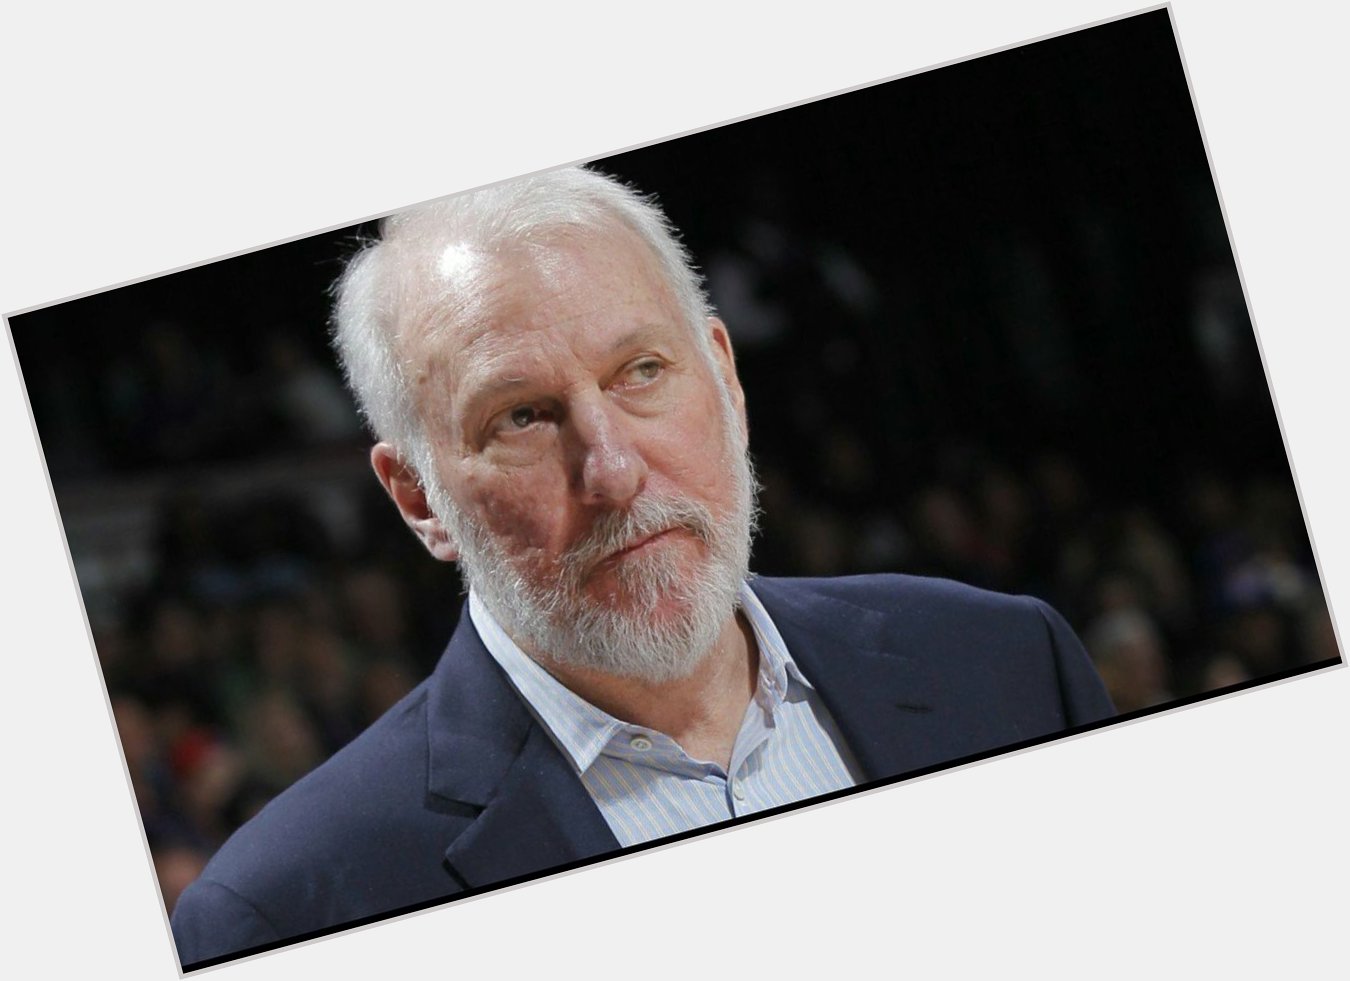 Wishing a HAPPY BIRTHDAY to Coach Gregg Popovich. 68 years young! 